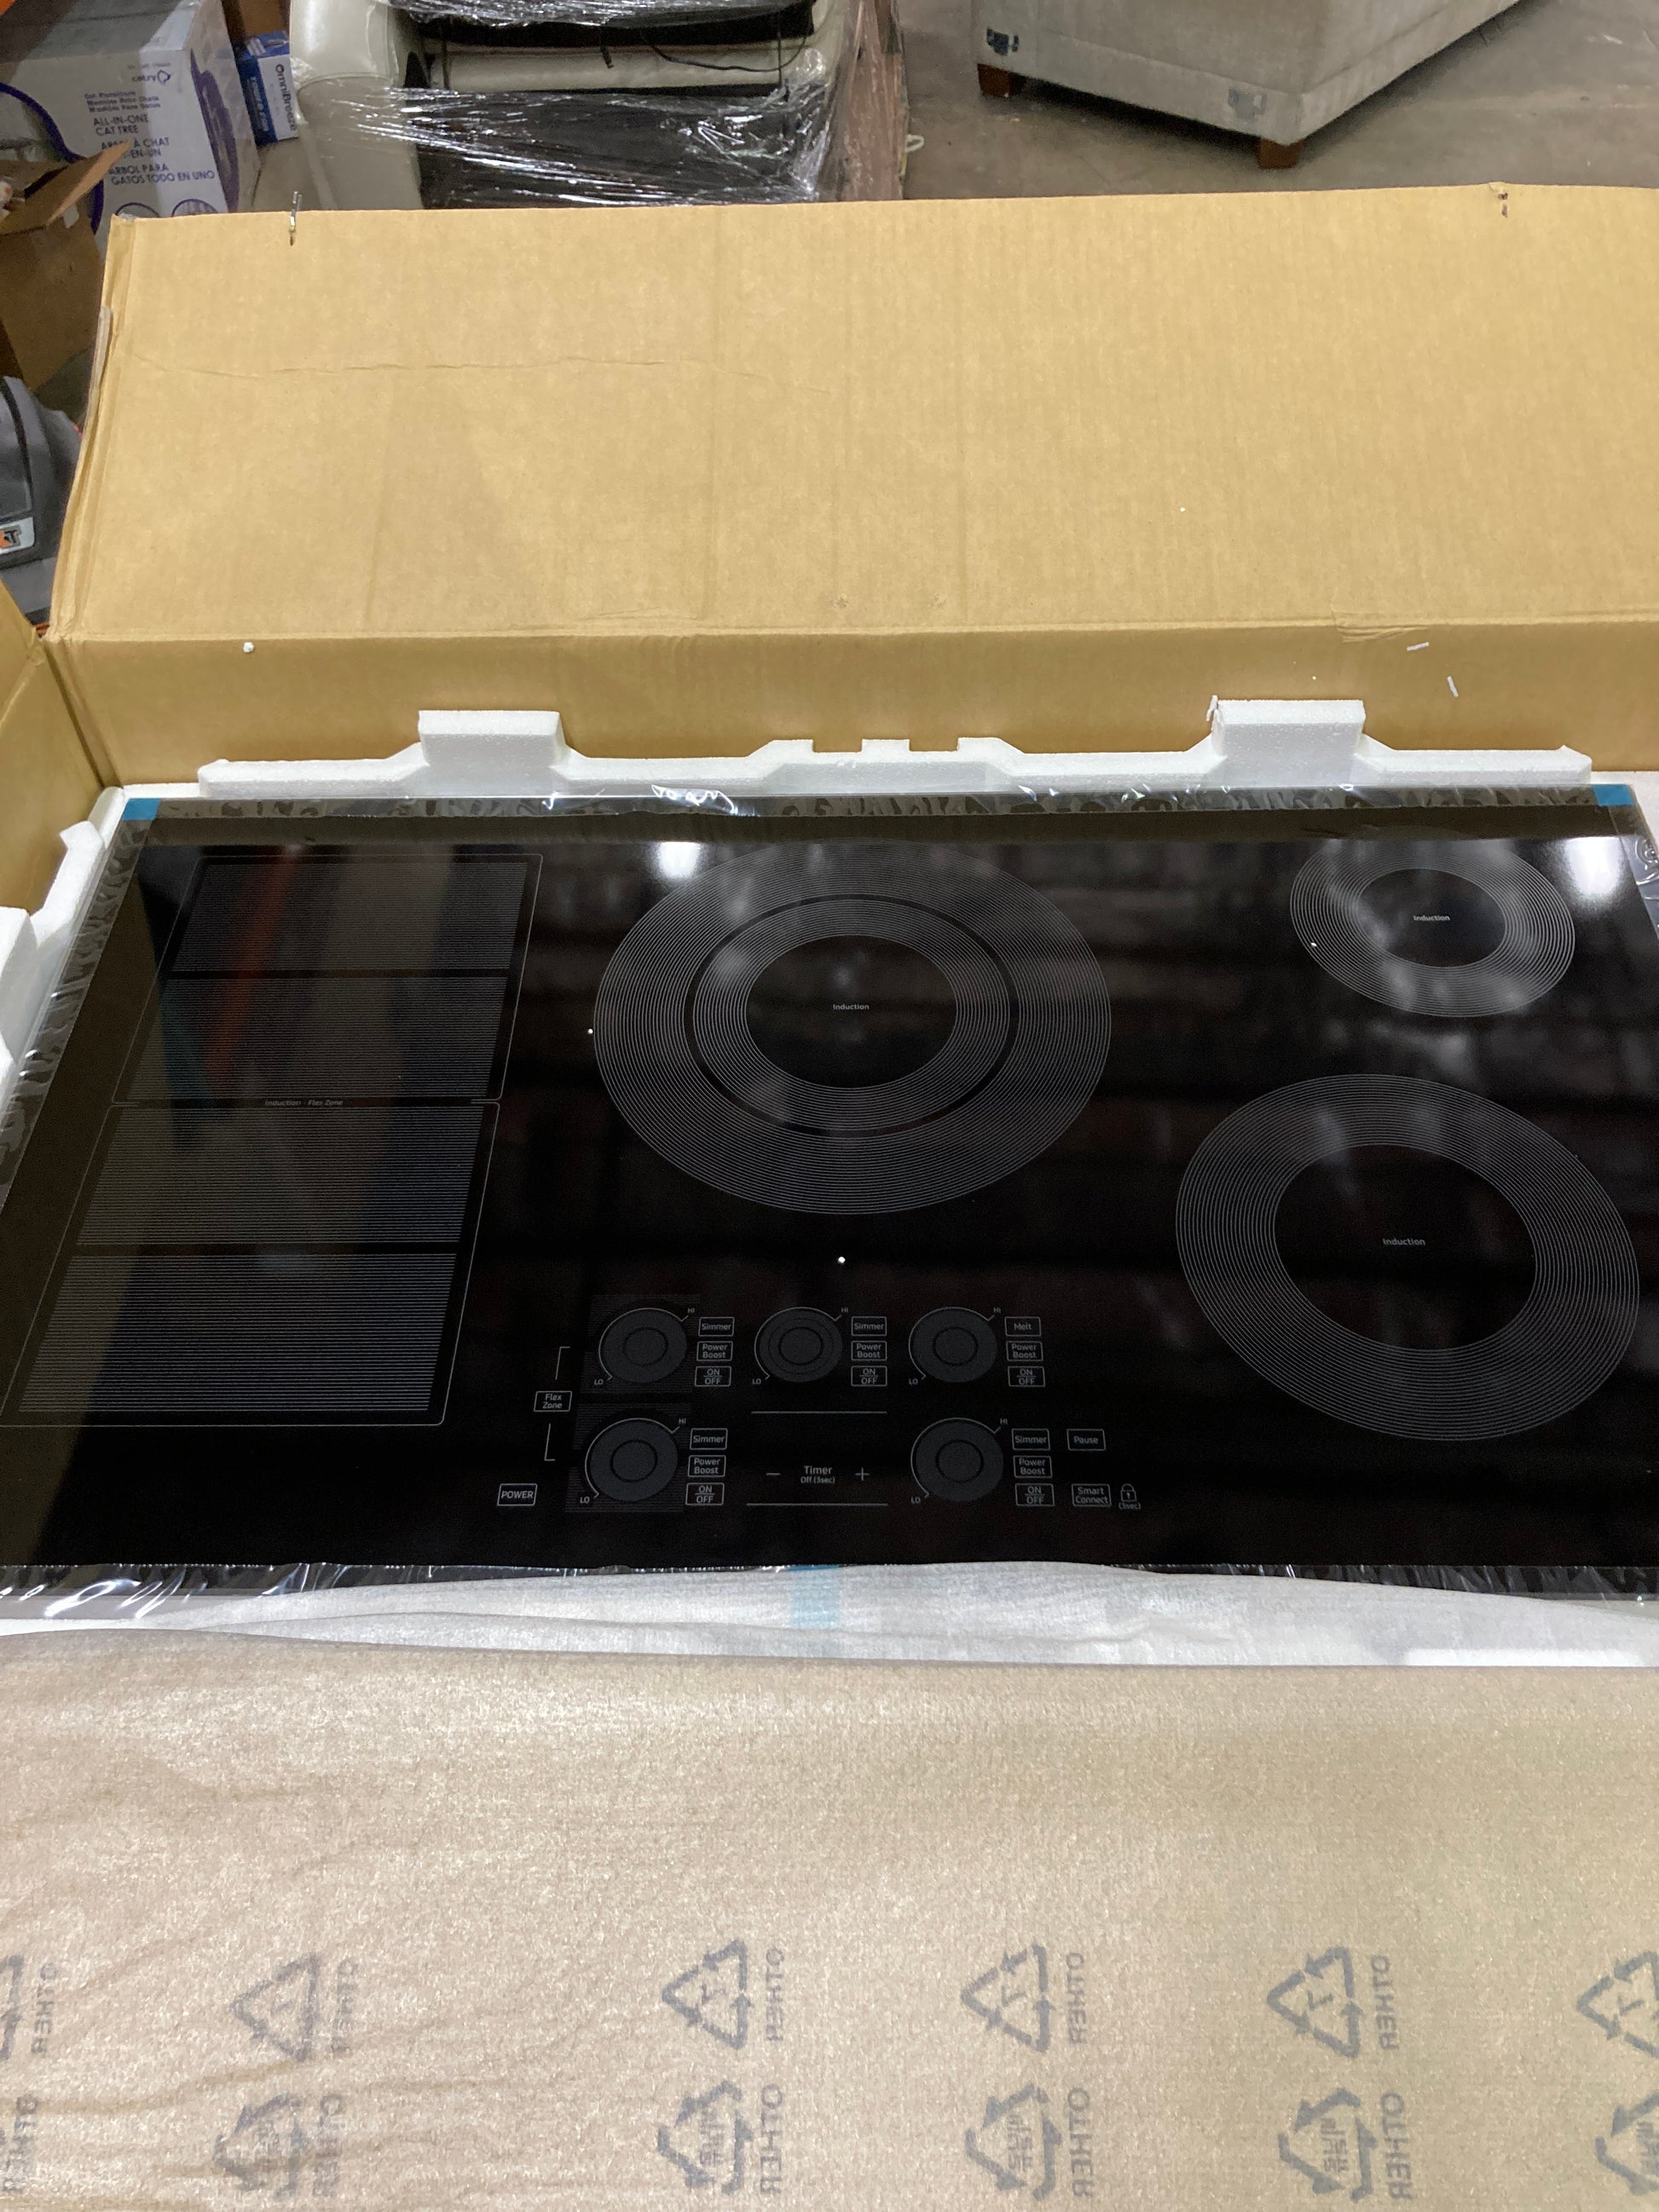 NEW - Samsung 36 in. 5-Element INDUCTION Cooktop with Wifi Connectivity Model: NZ36K7880US - Retail $2499 Default Title